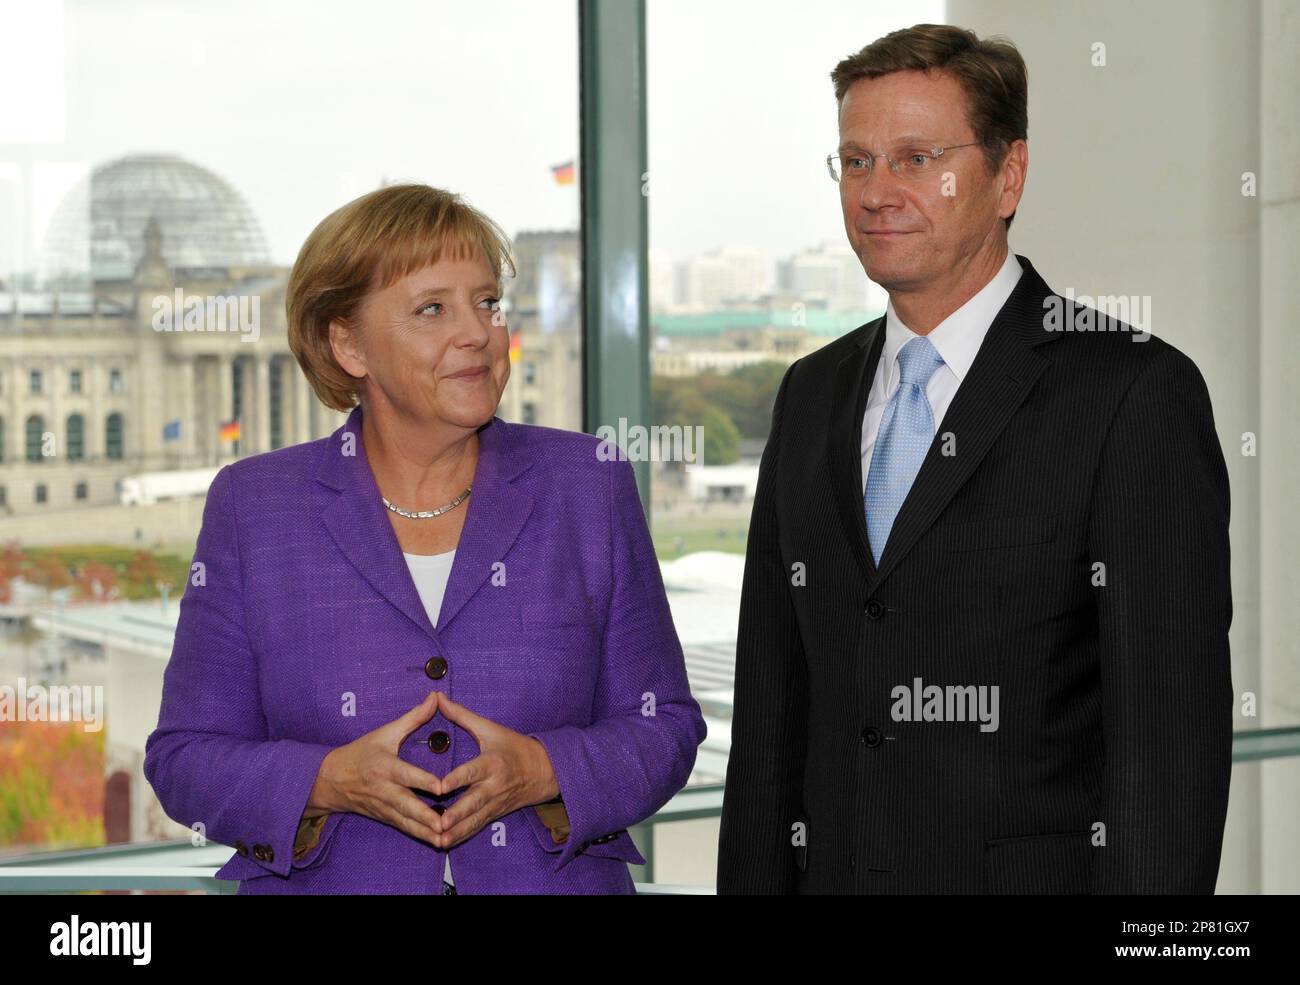 Angela Merkel, German Chancellor and leader of the conservative Christian Democratic Union party (CDU), left, and Guido Westerwelle, leader of the pro-business Free Democrats (FDP) meet at the Chancellery in Berlin Monday Sept. 28, 2009. Merkel's conservatives vowed on Monday to seal a coalition deal with the Free Democrats (FDP) within a month after winning Germany's election (Bundestagswahl). (AP Photo/Wolfgang Rattay,Pool) Stockfoto